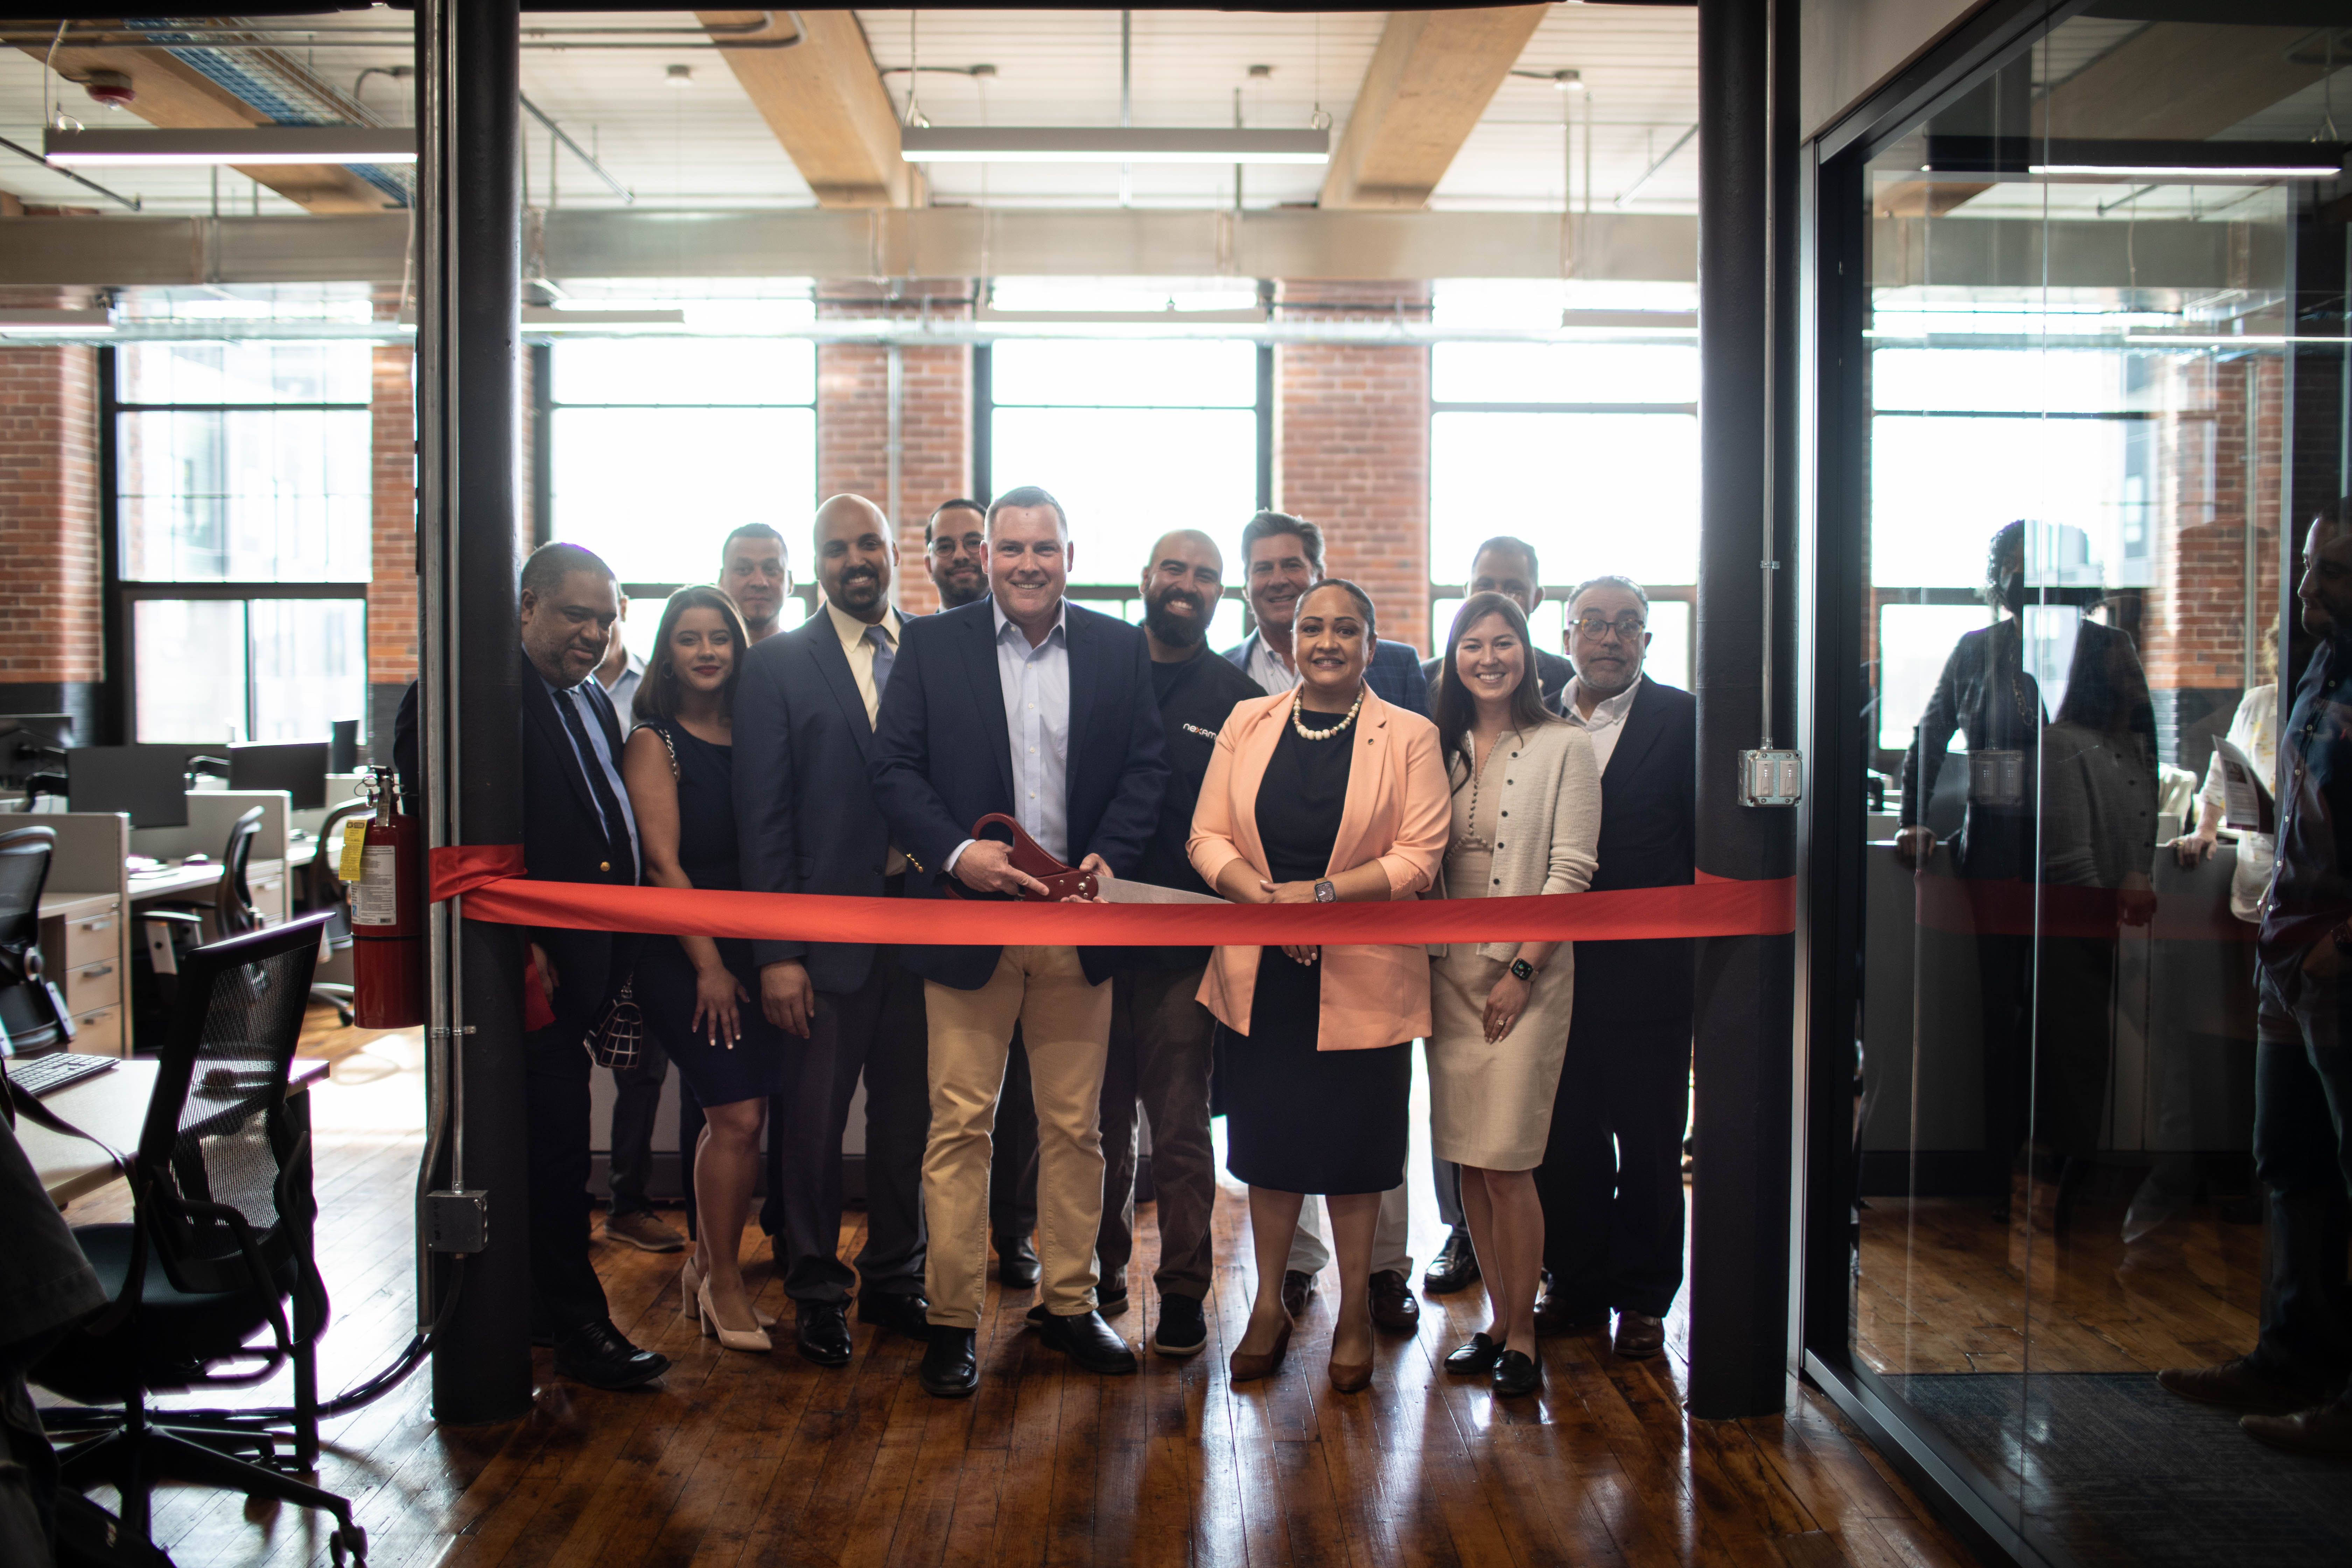 Nexamp leaders and local officials celebrate the opening of Nexamp's new space in Lawrence Mass.